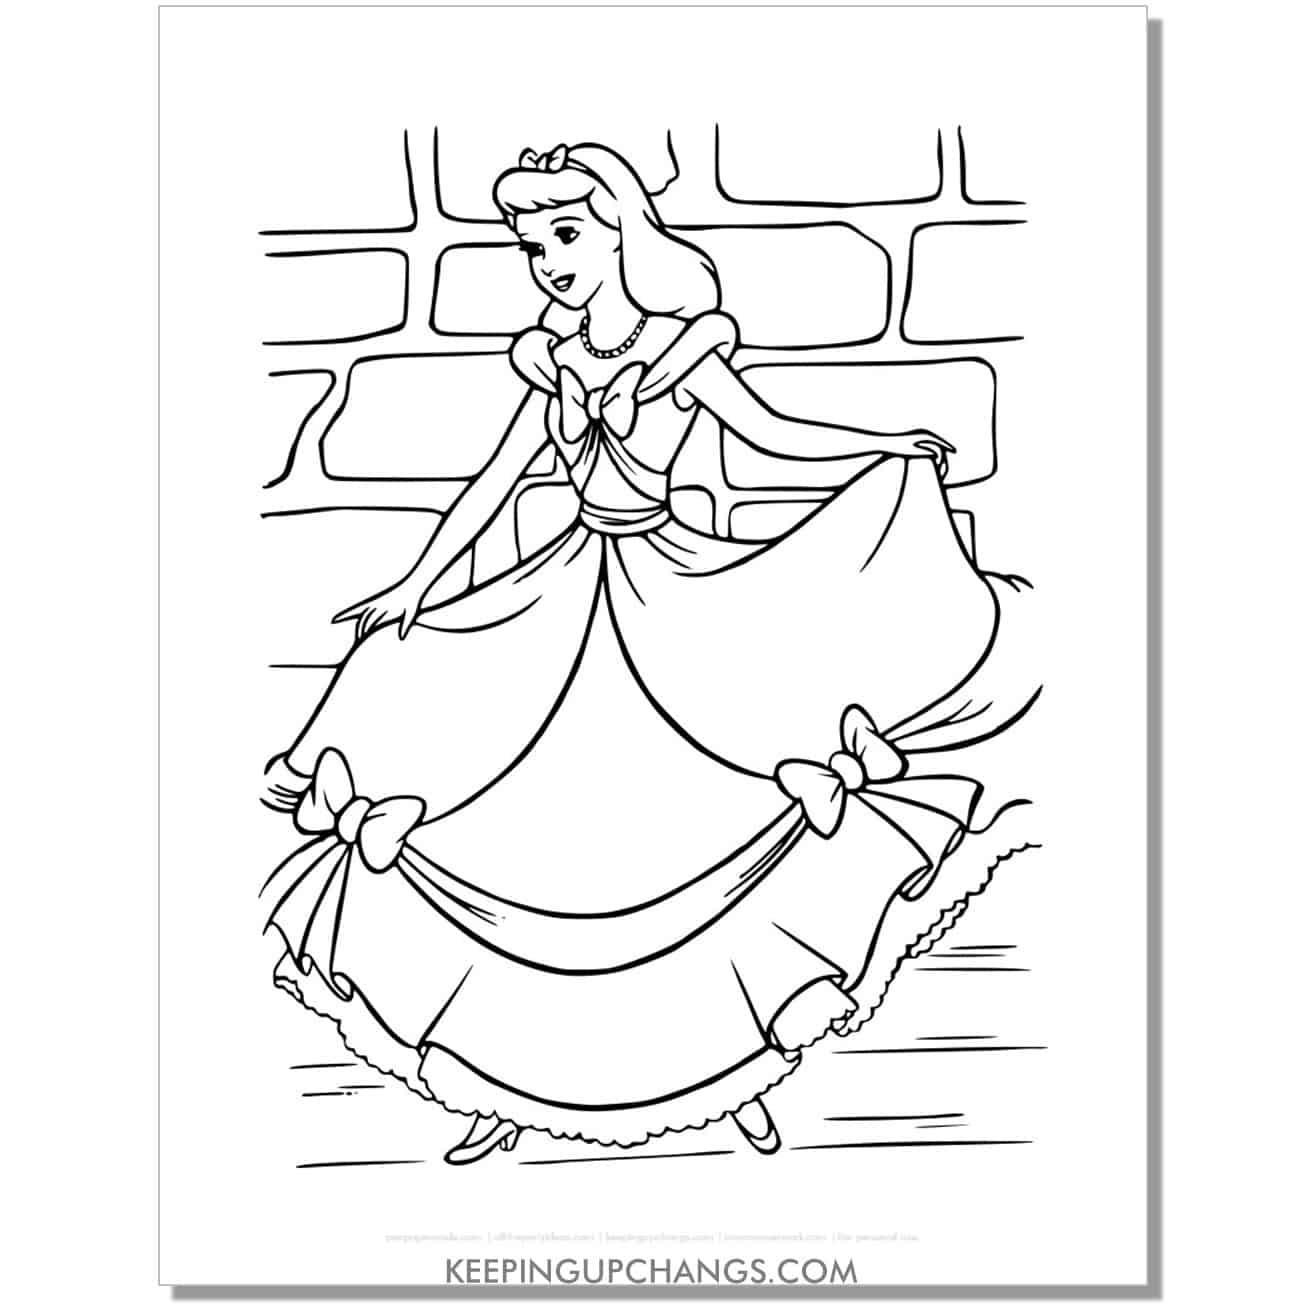 cinderella tries on dress with bows at home coloring page, sheet.